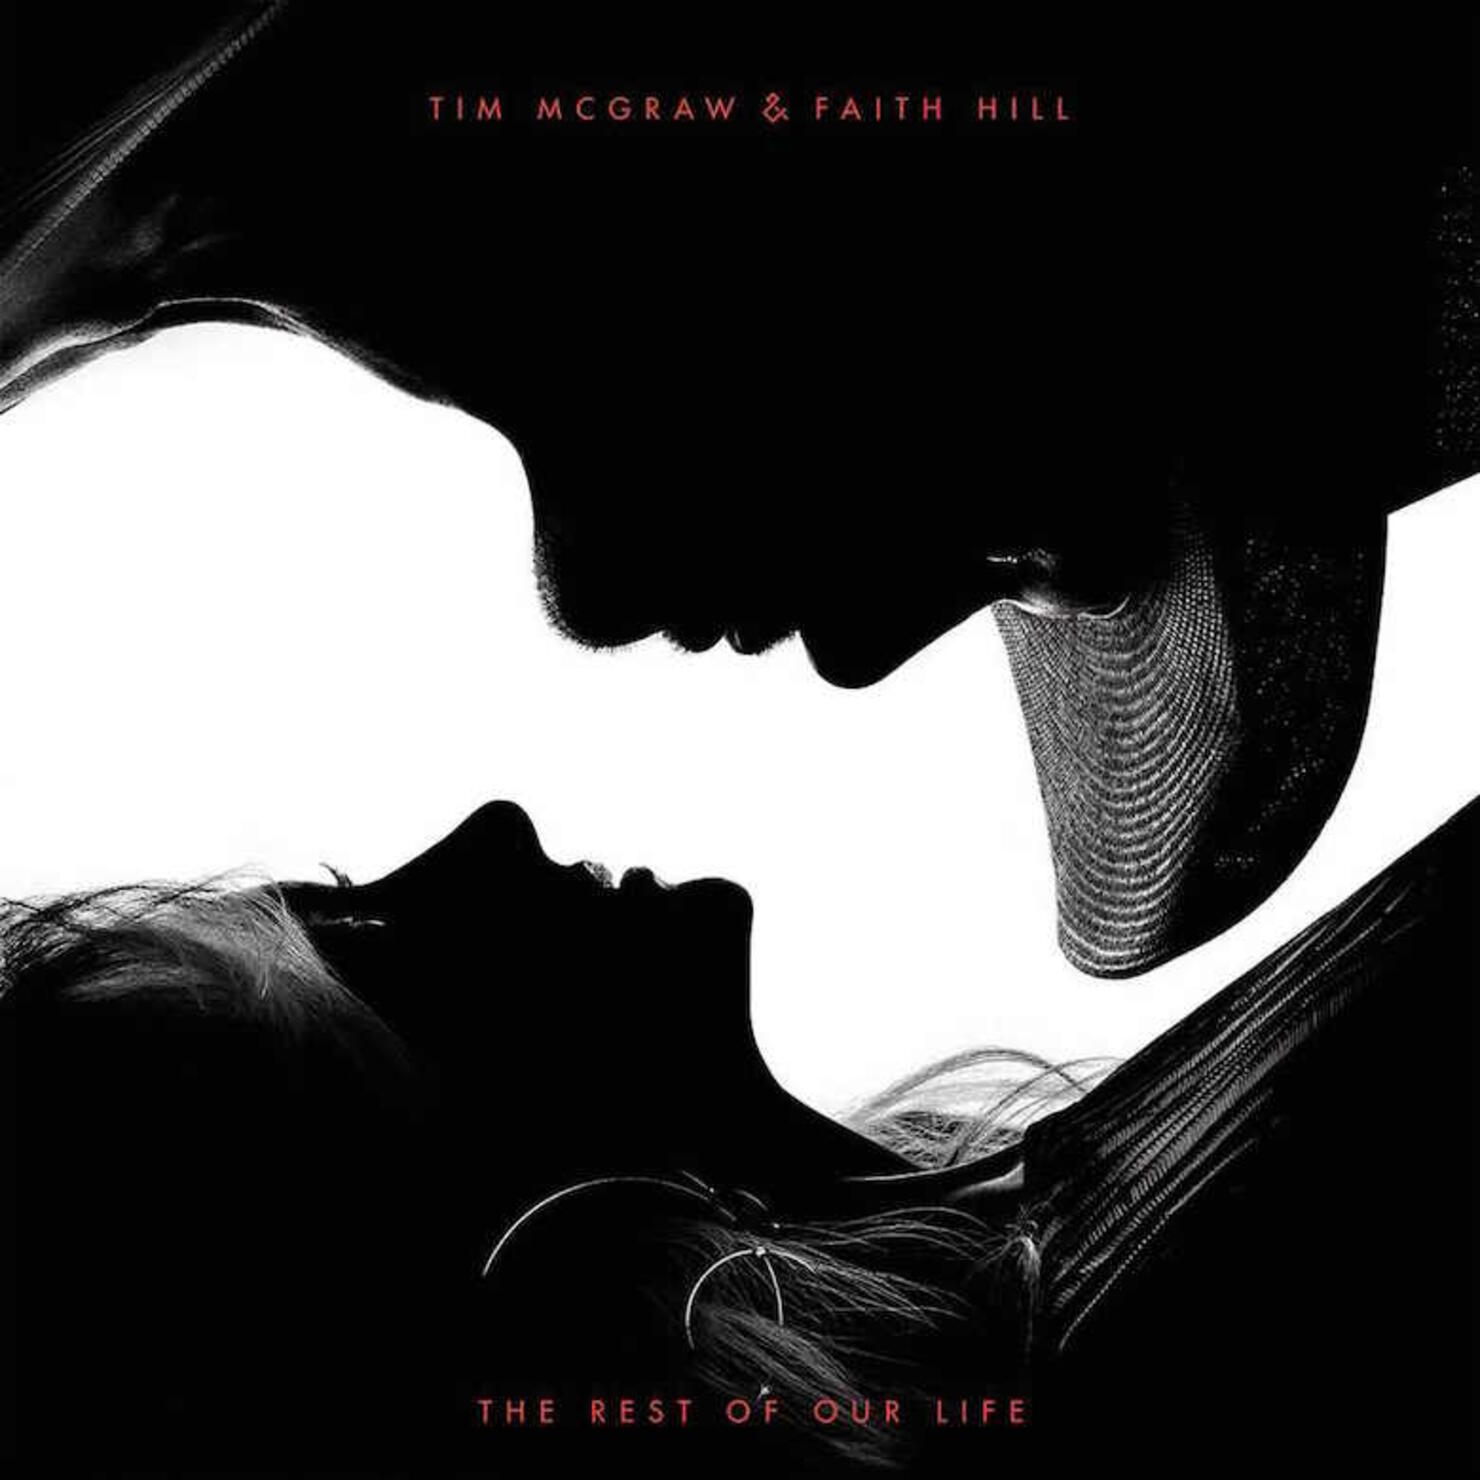 Faith Hill & Tim McGraw - 'The Rest of Our Life'